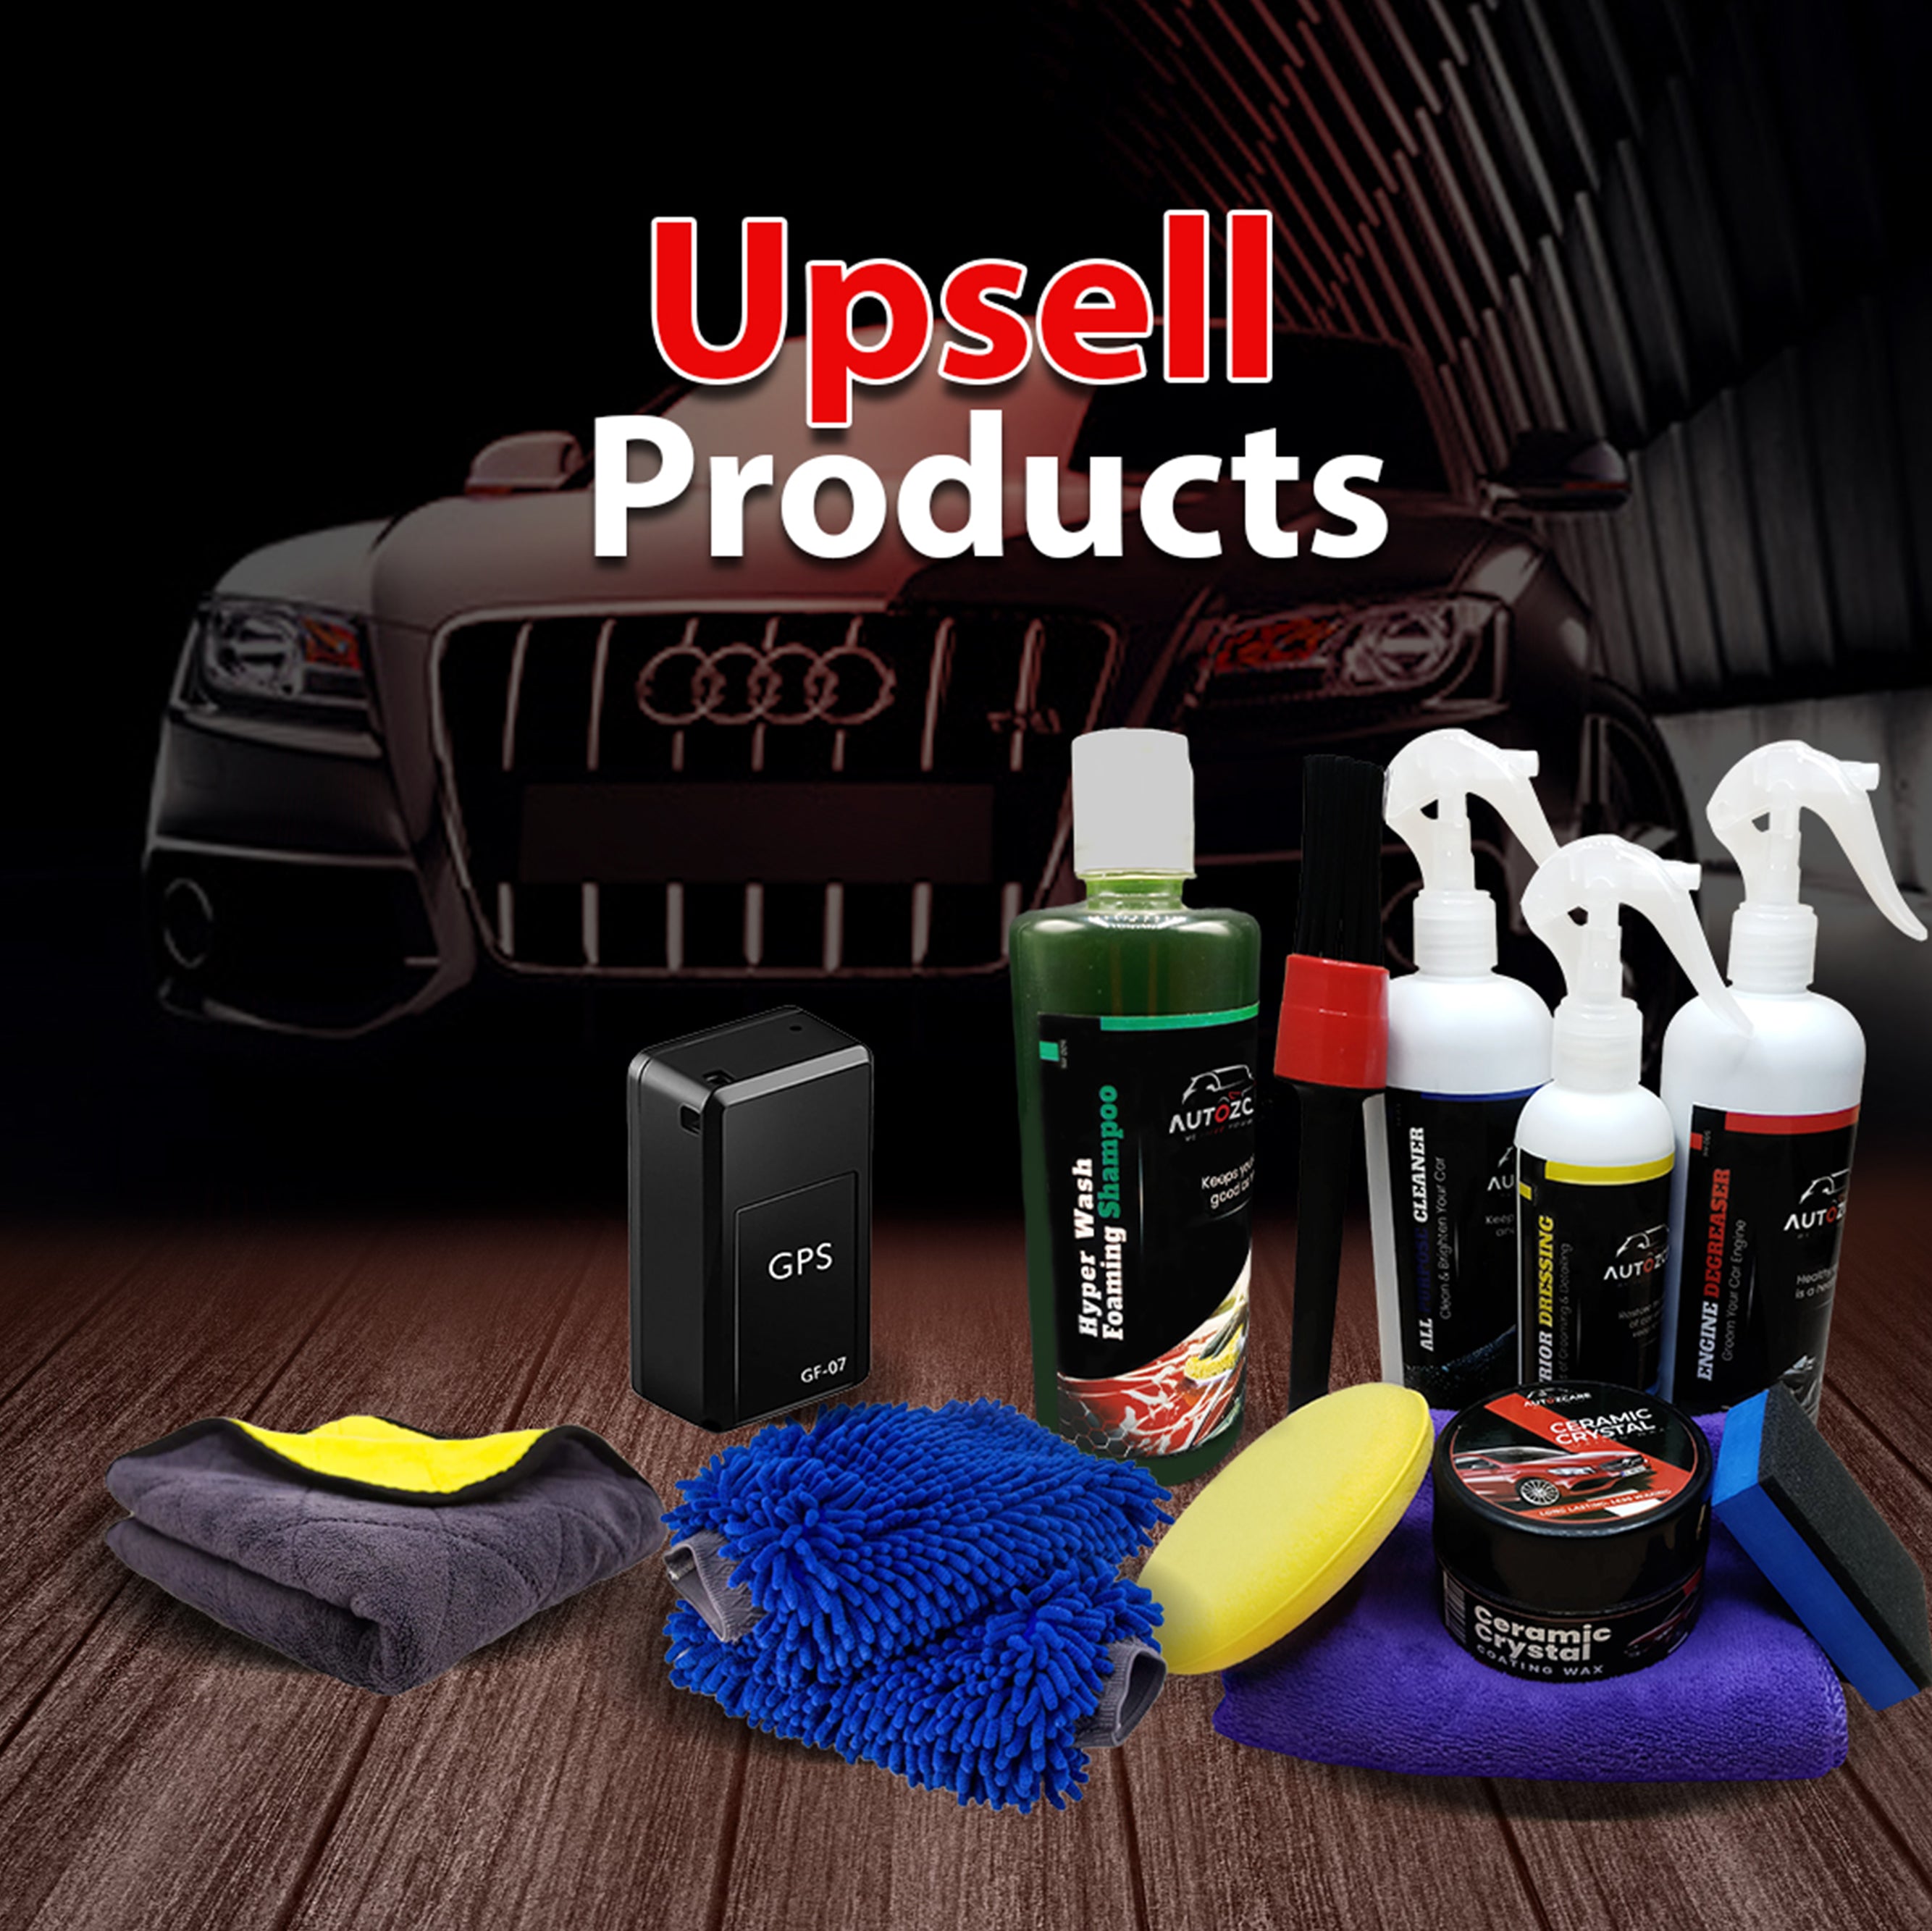 Upsell Products